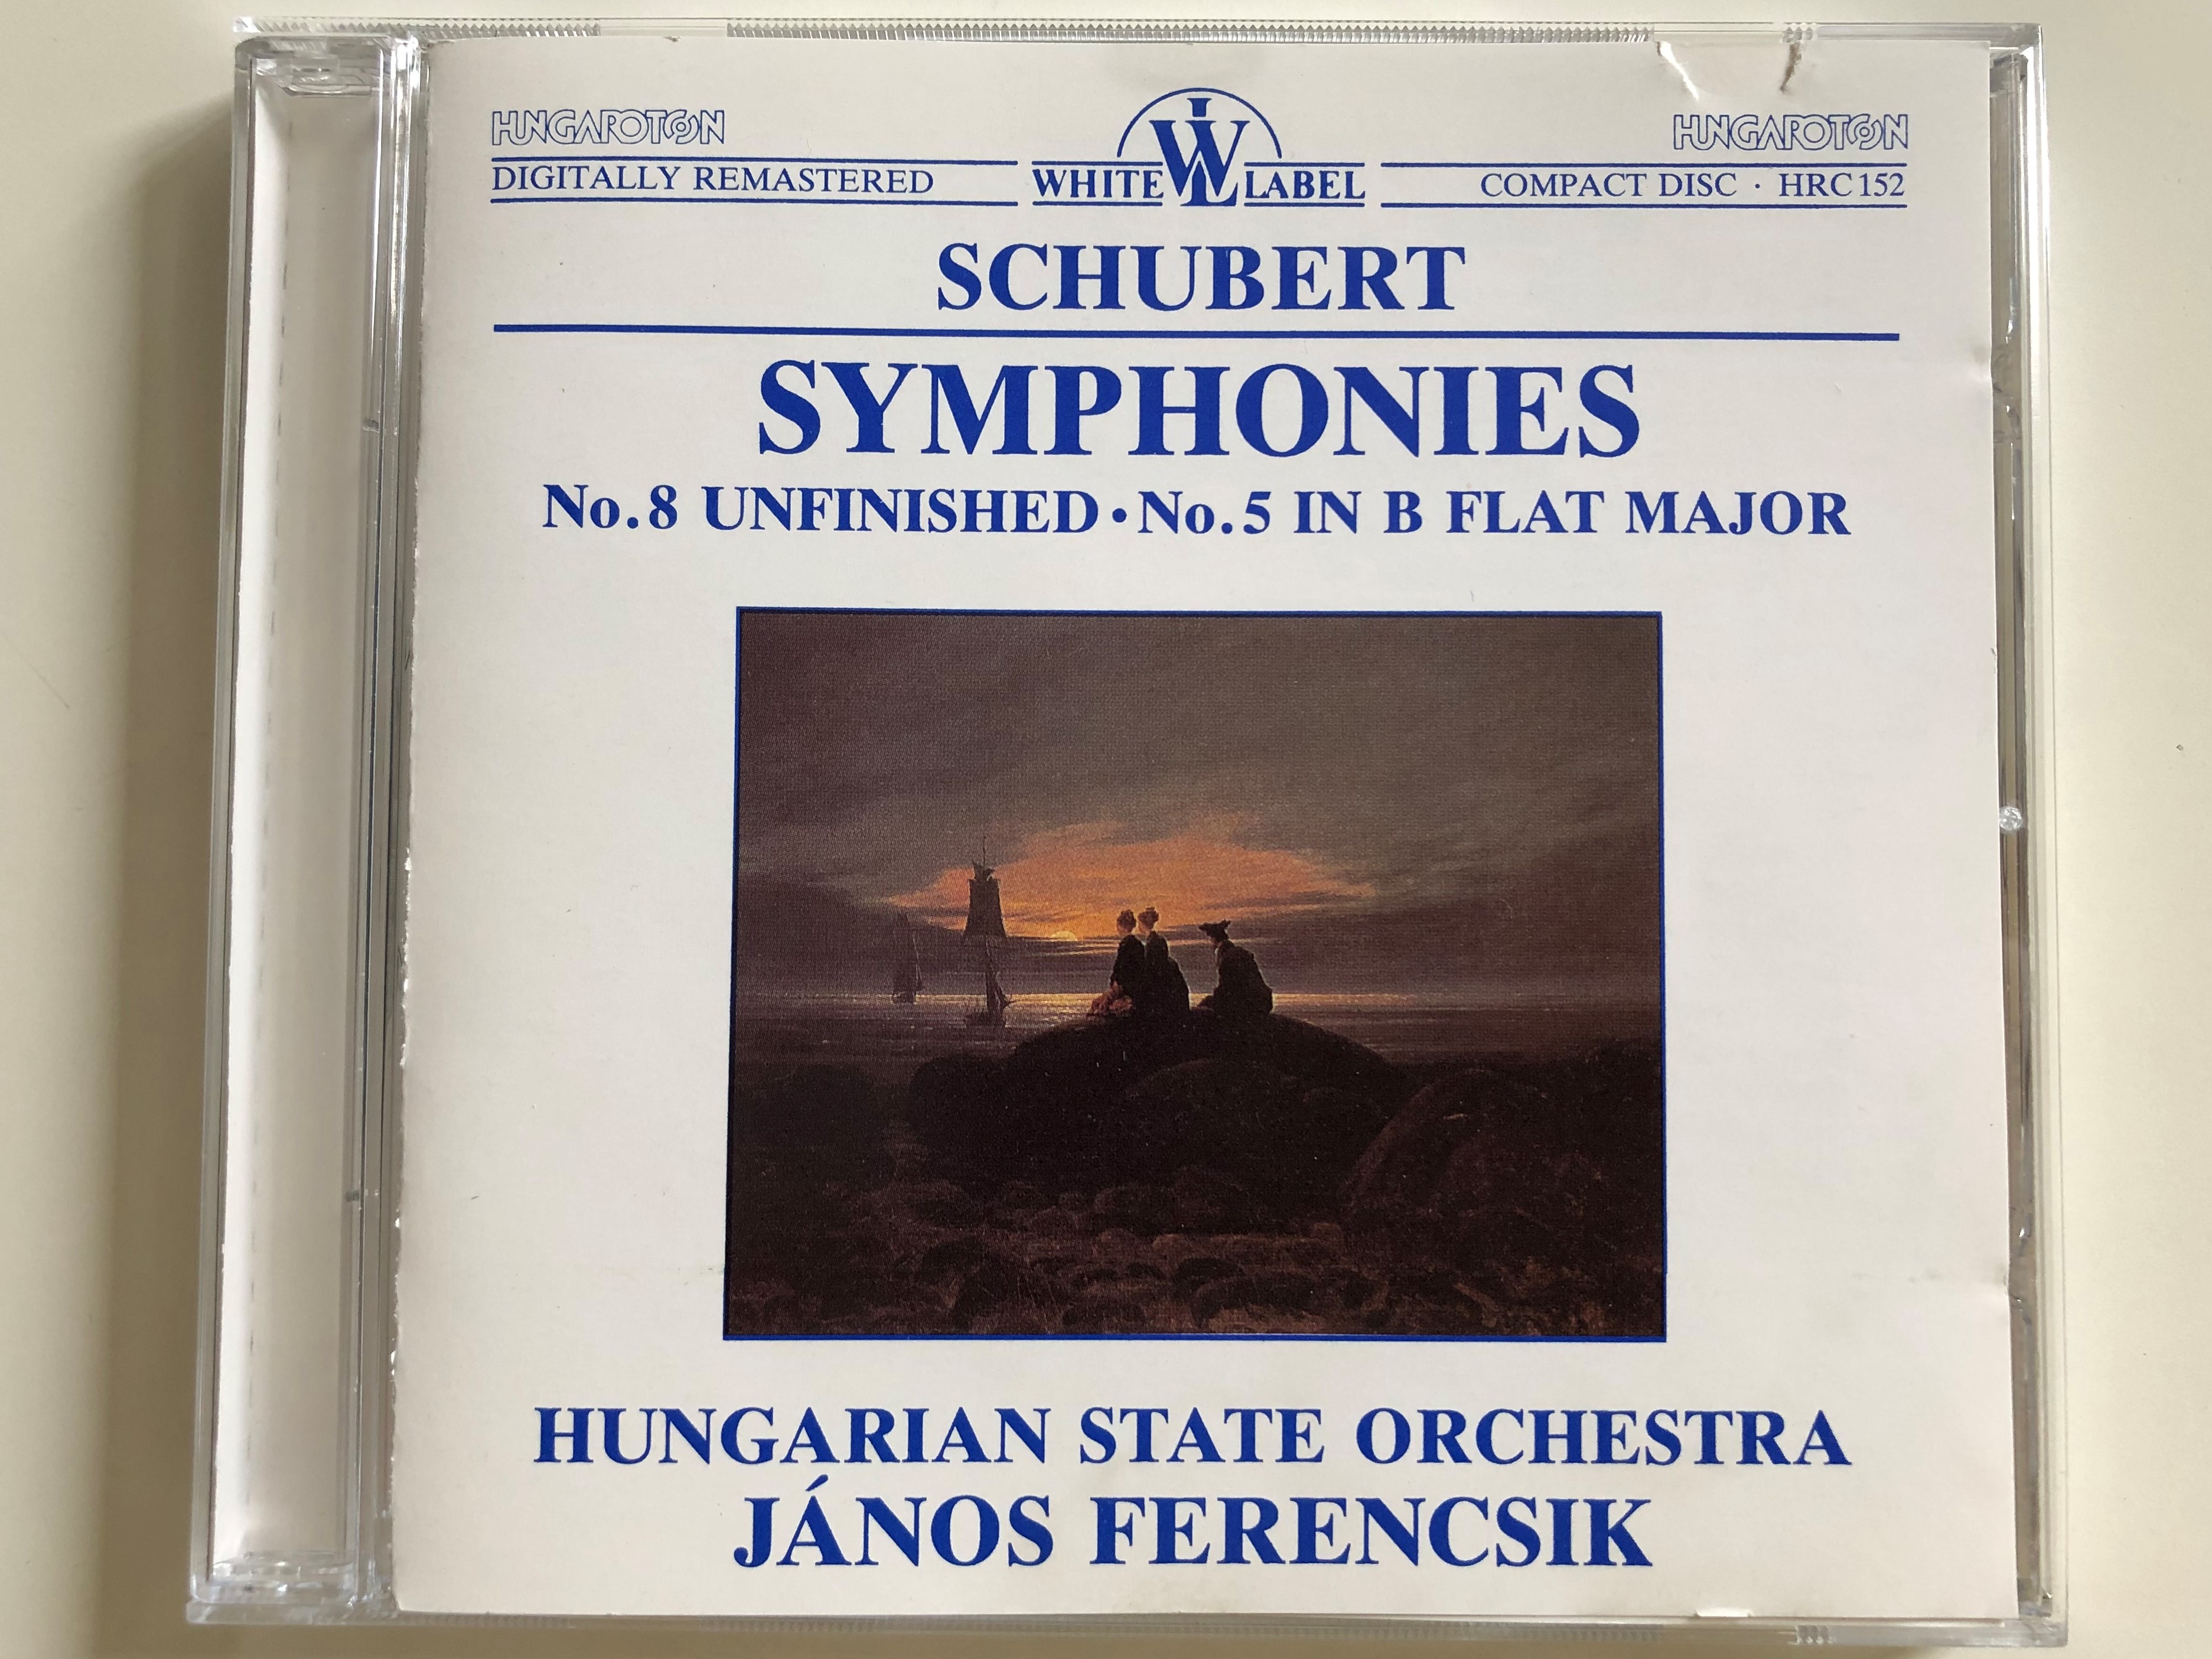 -franz-schubert-symphonies-no.-8-unfinished-no.-5-in-b-flat-major-hungarian-state-orchestra-conducted-by-j-nos-ferencsik-hungaroton-white-label-audio-cd-hrc-152-1-.jpg